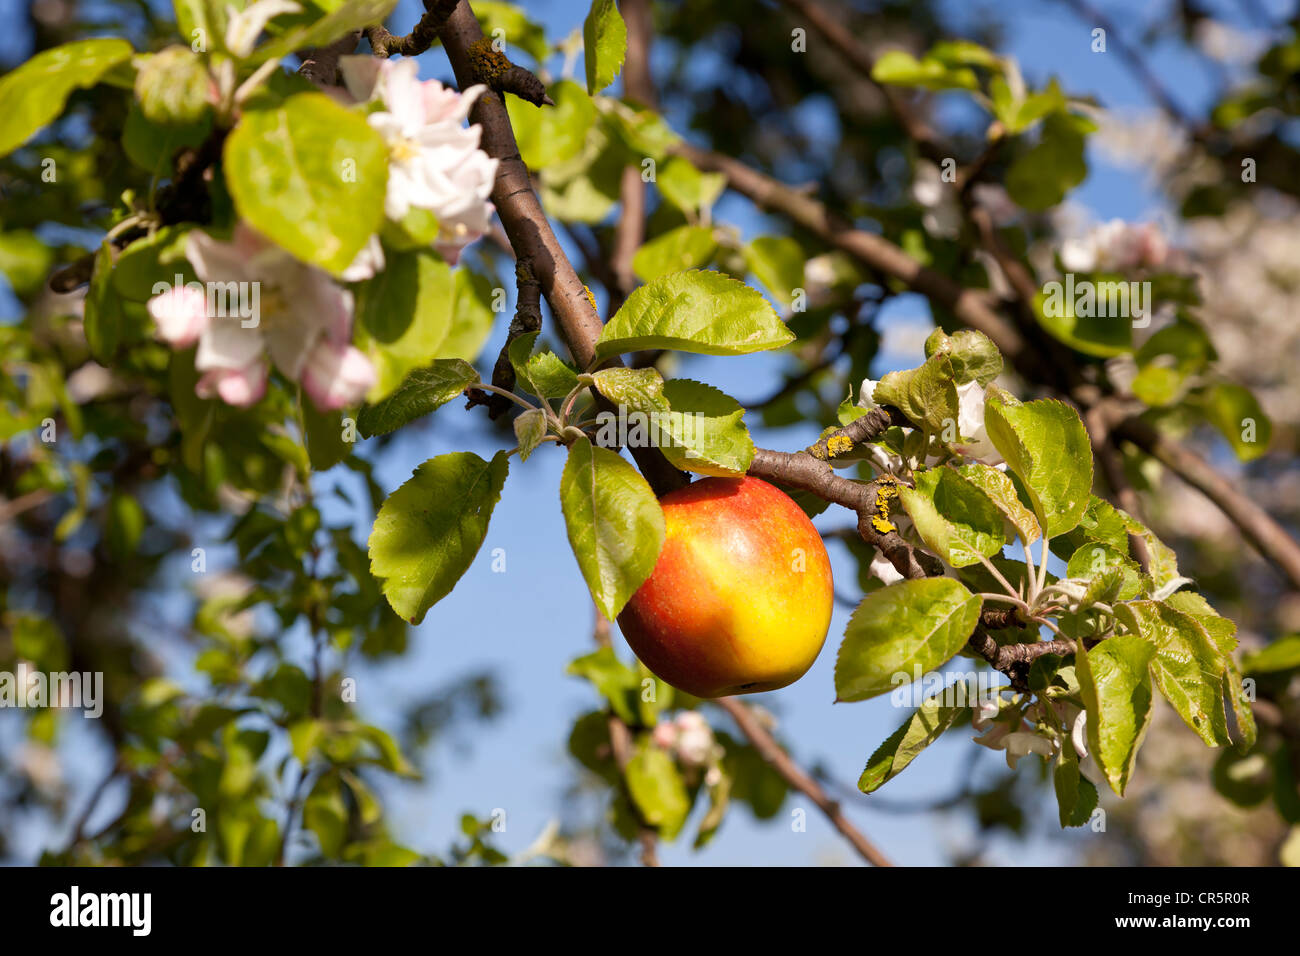 Red Apple (Malus domestica) on a branch with apple blossoms, Saxony, Germany, Europe Stock Photo